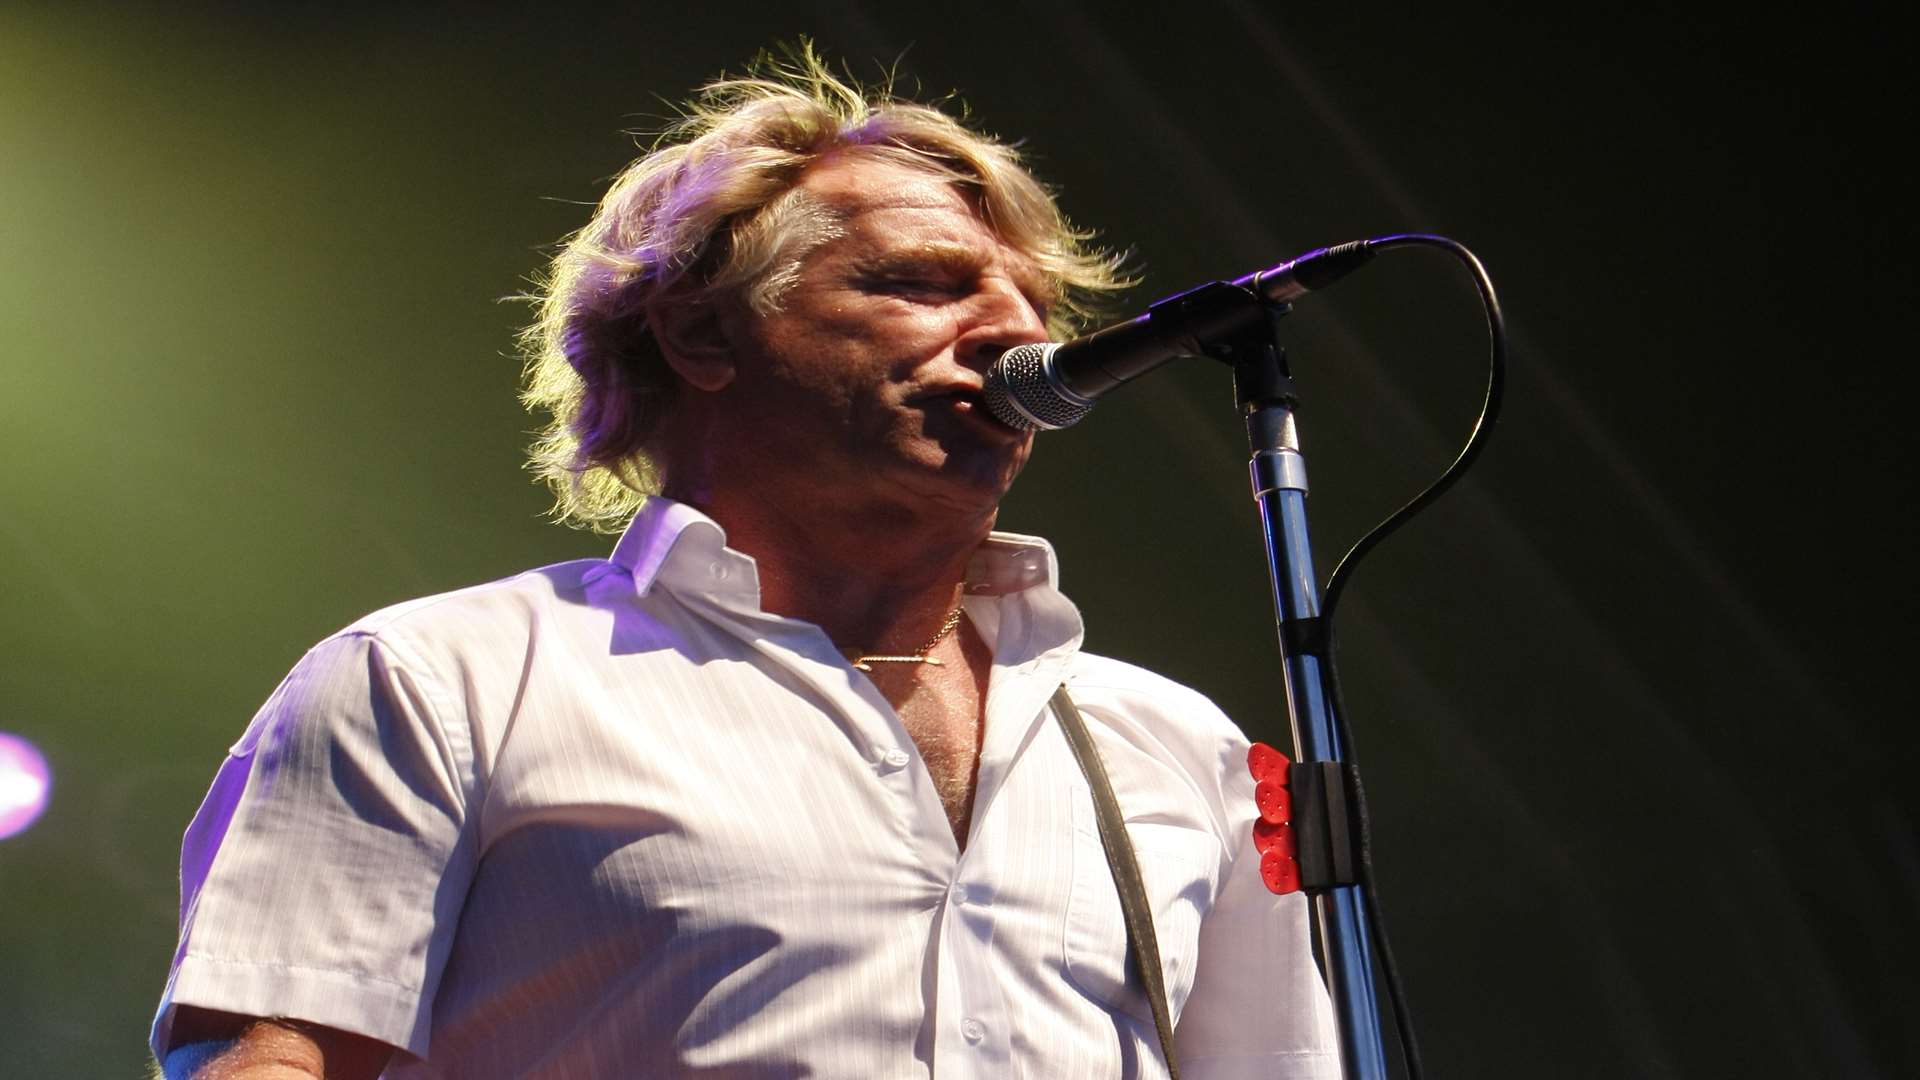 Status Quo have cancelled tonight's gig after Rick Parfitt suffered a stomach complaint